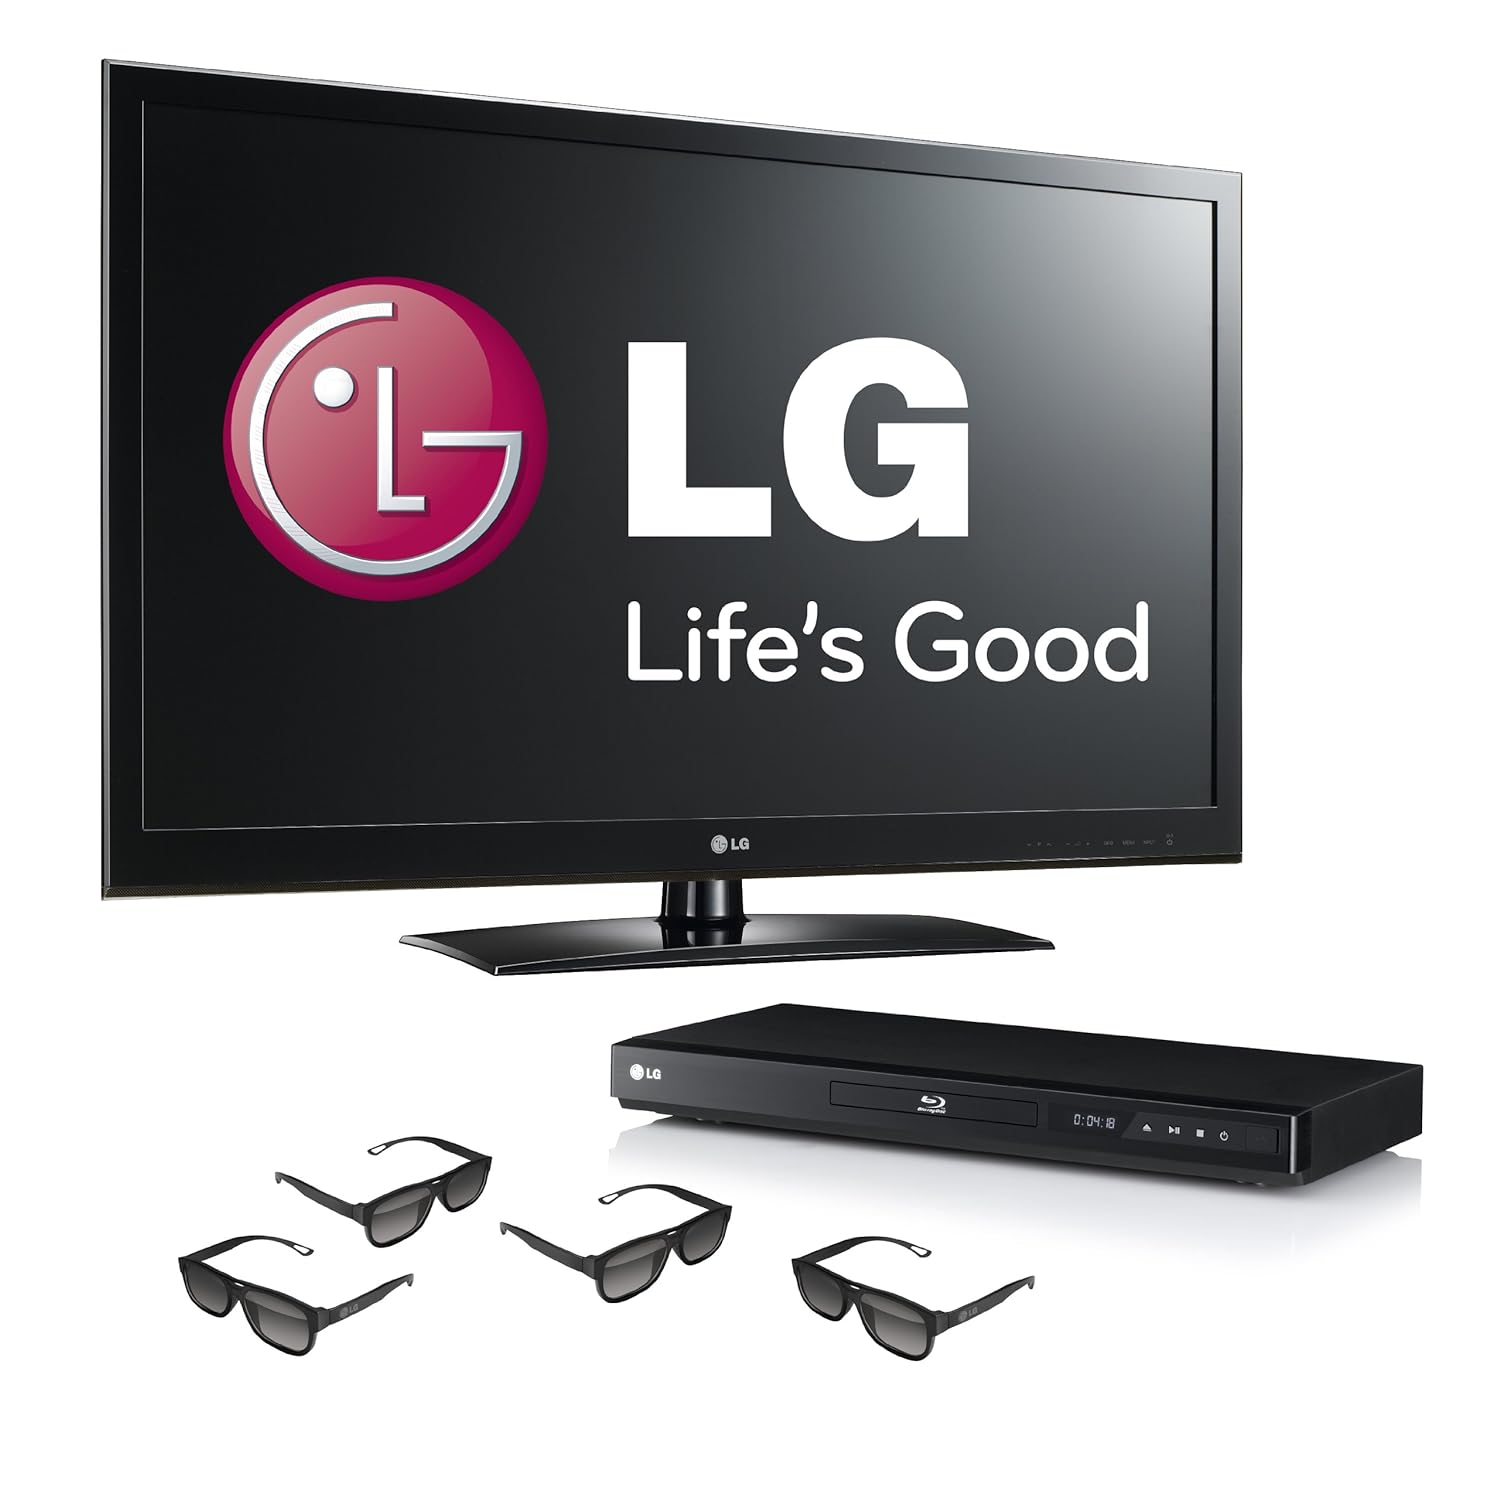 LG Electronics 47LW5300 47-Inches 1080p 120HZ Cinema 3D LED TV and Four ...